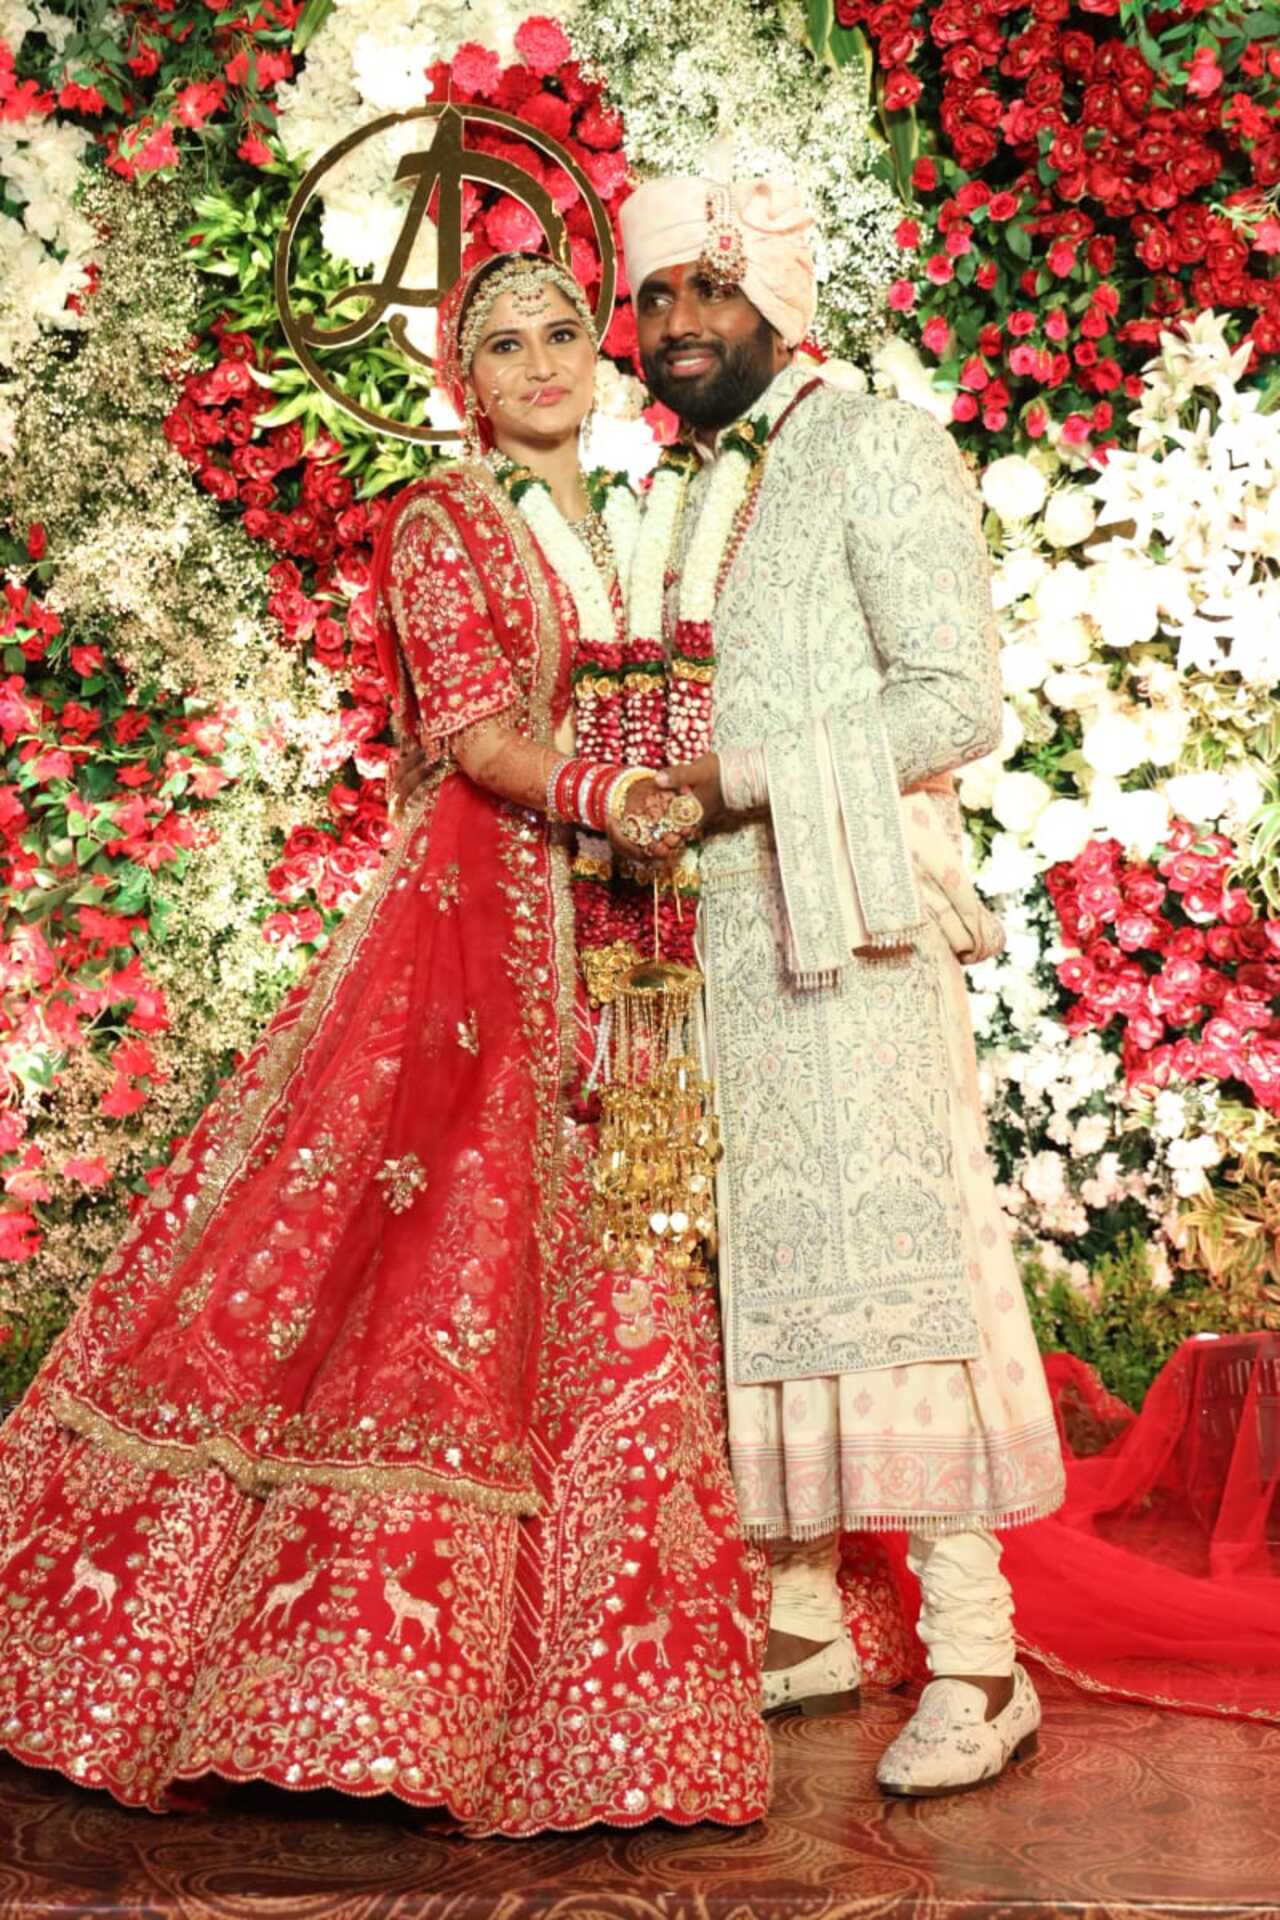 For her big day, Arti opted for a red heavy lehenga while Dipak wore a white sherwani